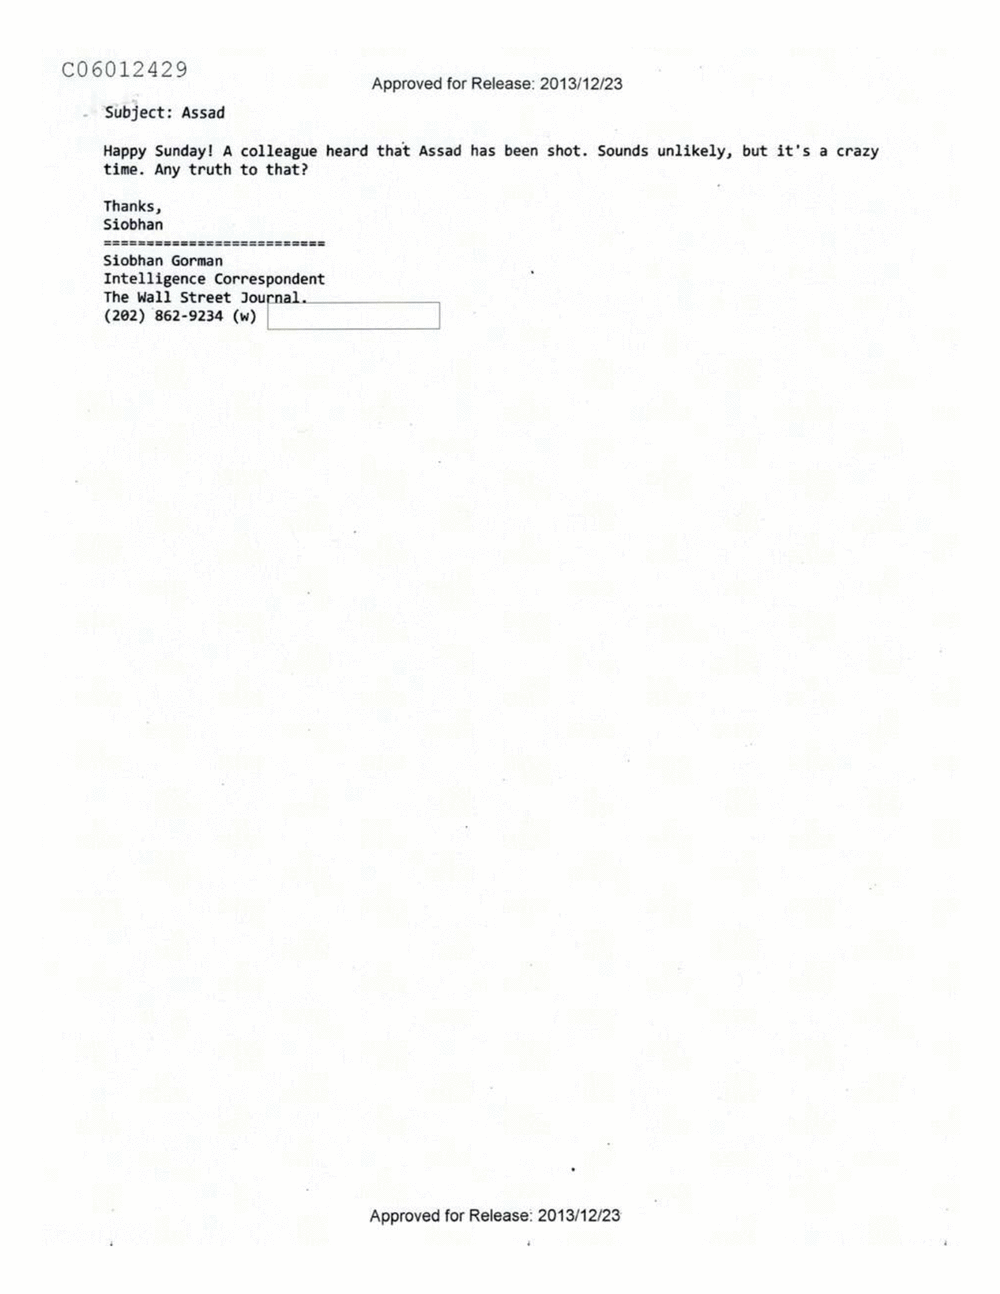 Page 5 from Email Correspondence Between Reporters and CIA Flacks